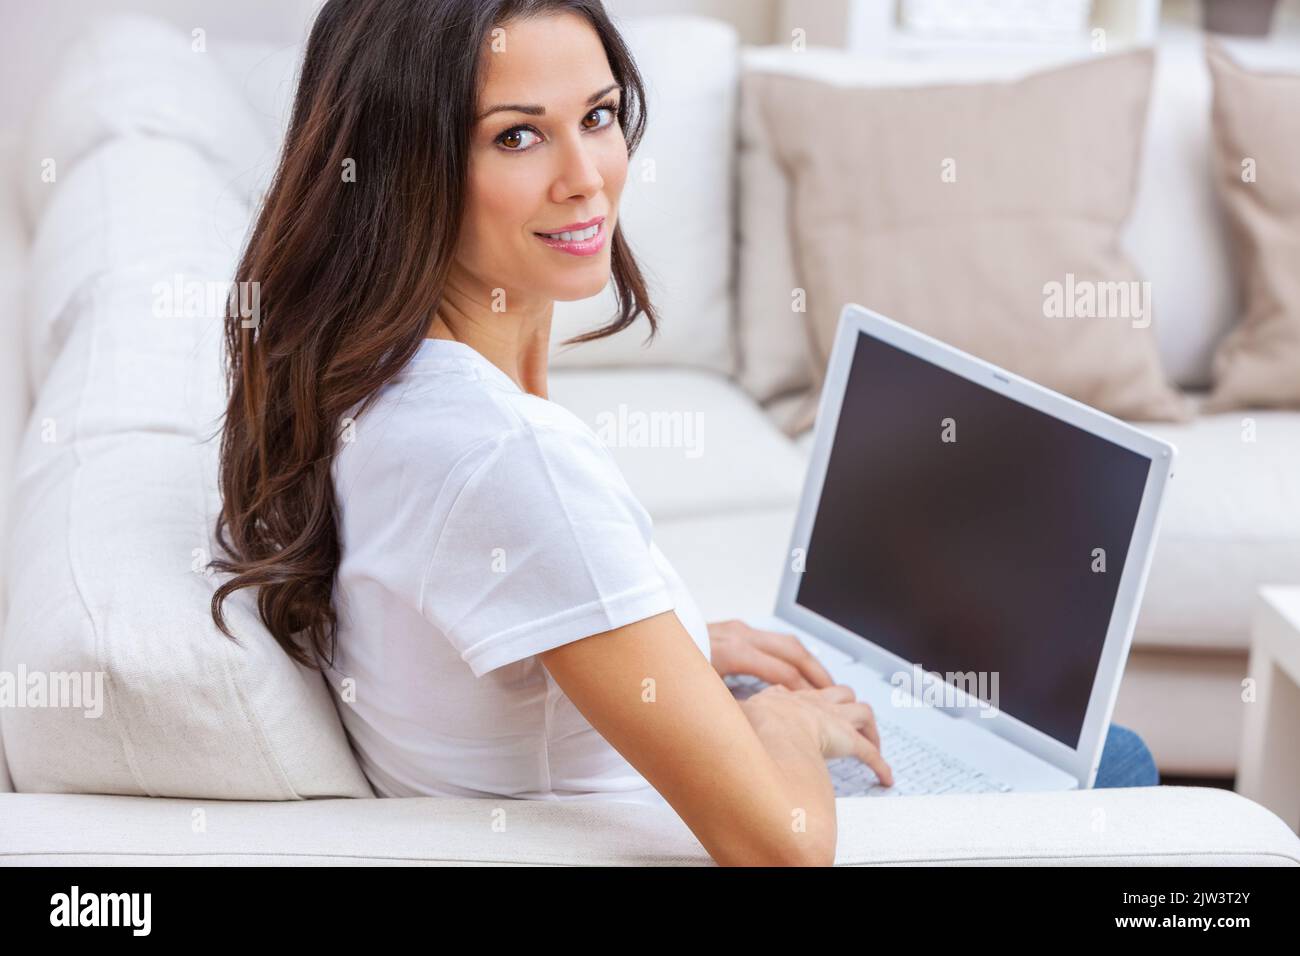 Beautiful girl female young woman at home sitting on sofa or settee using her laptop computer to work from home, on line shopping or social media Stock Photo